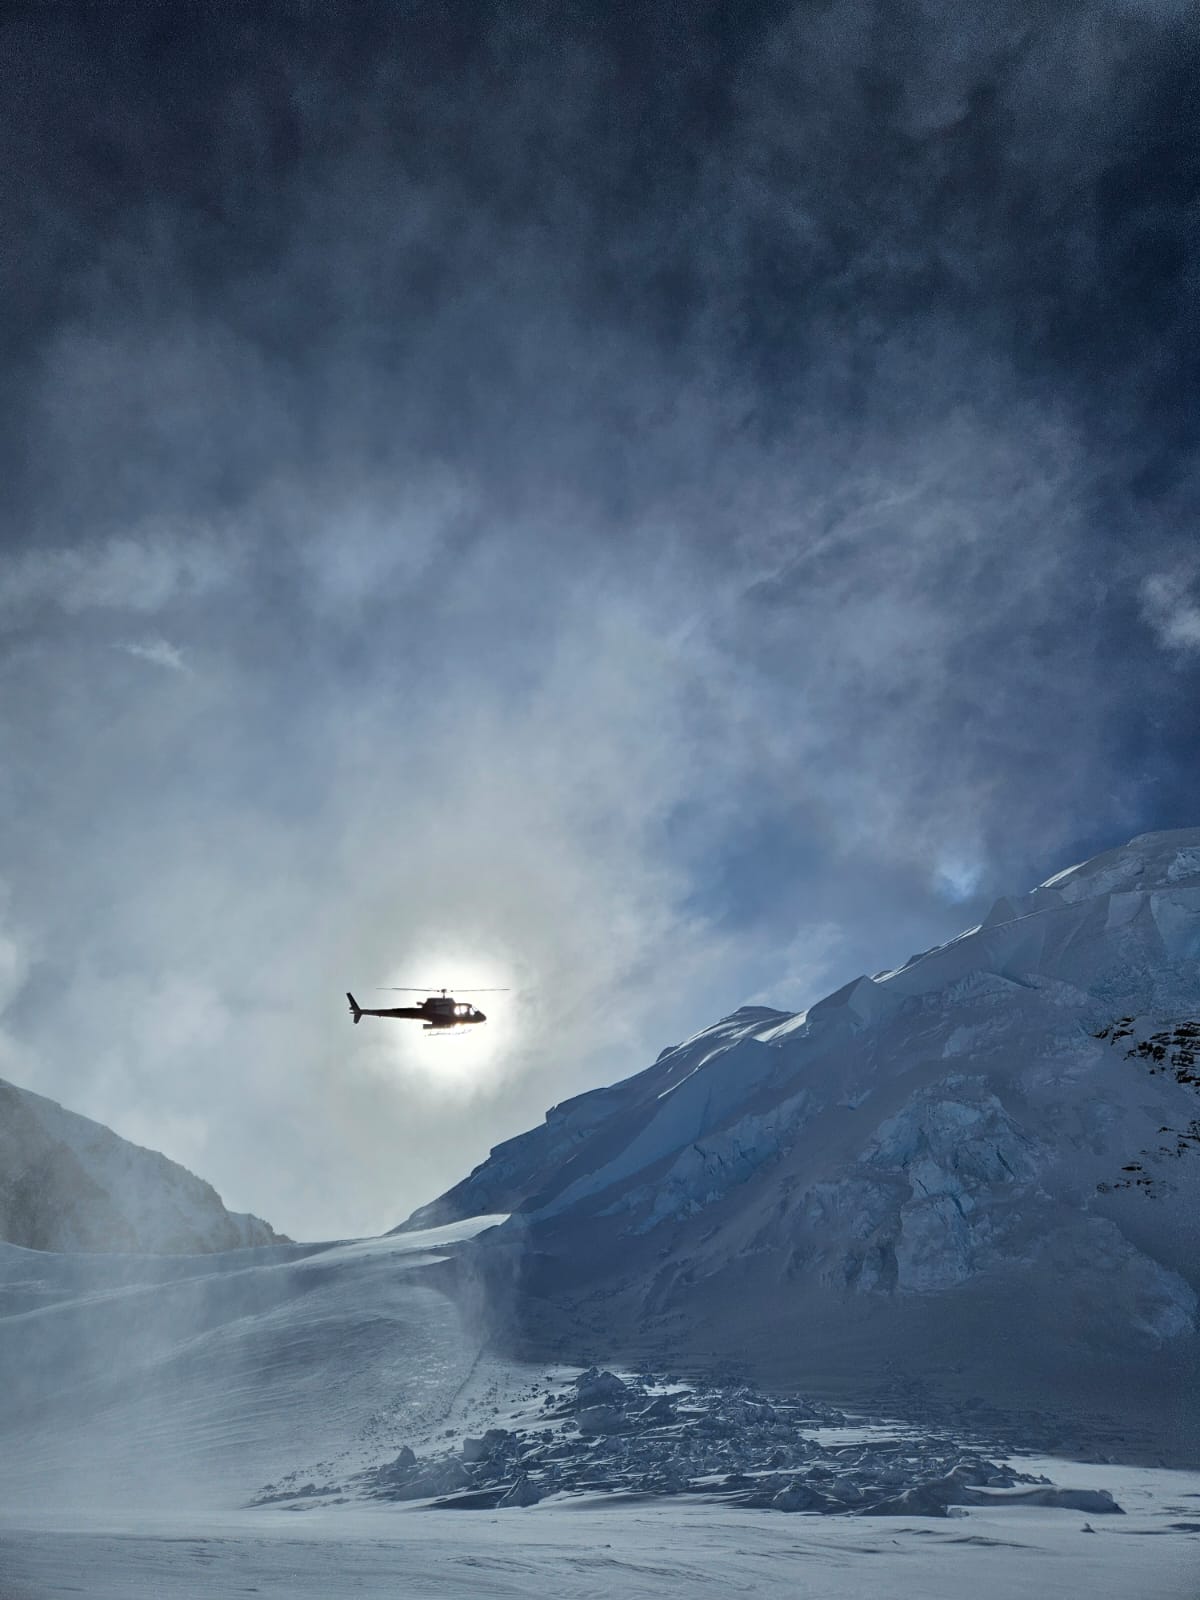 The silhouette of a helicopter in the sky above a glacial ridge